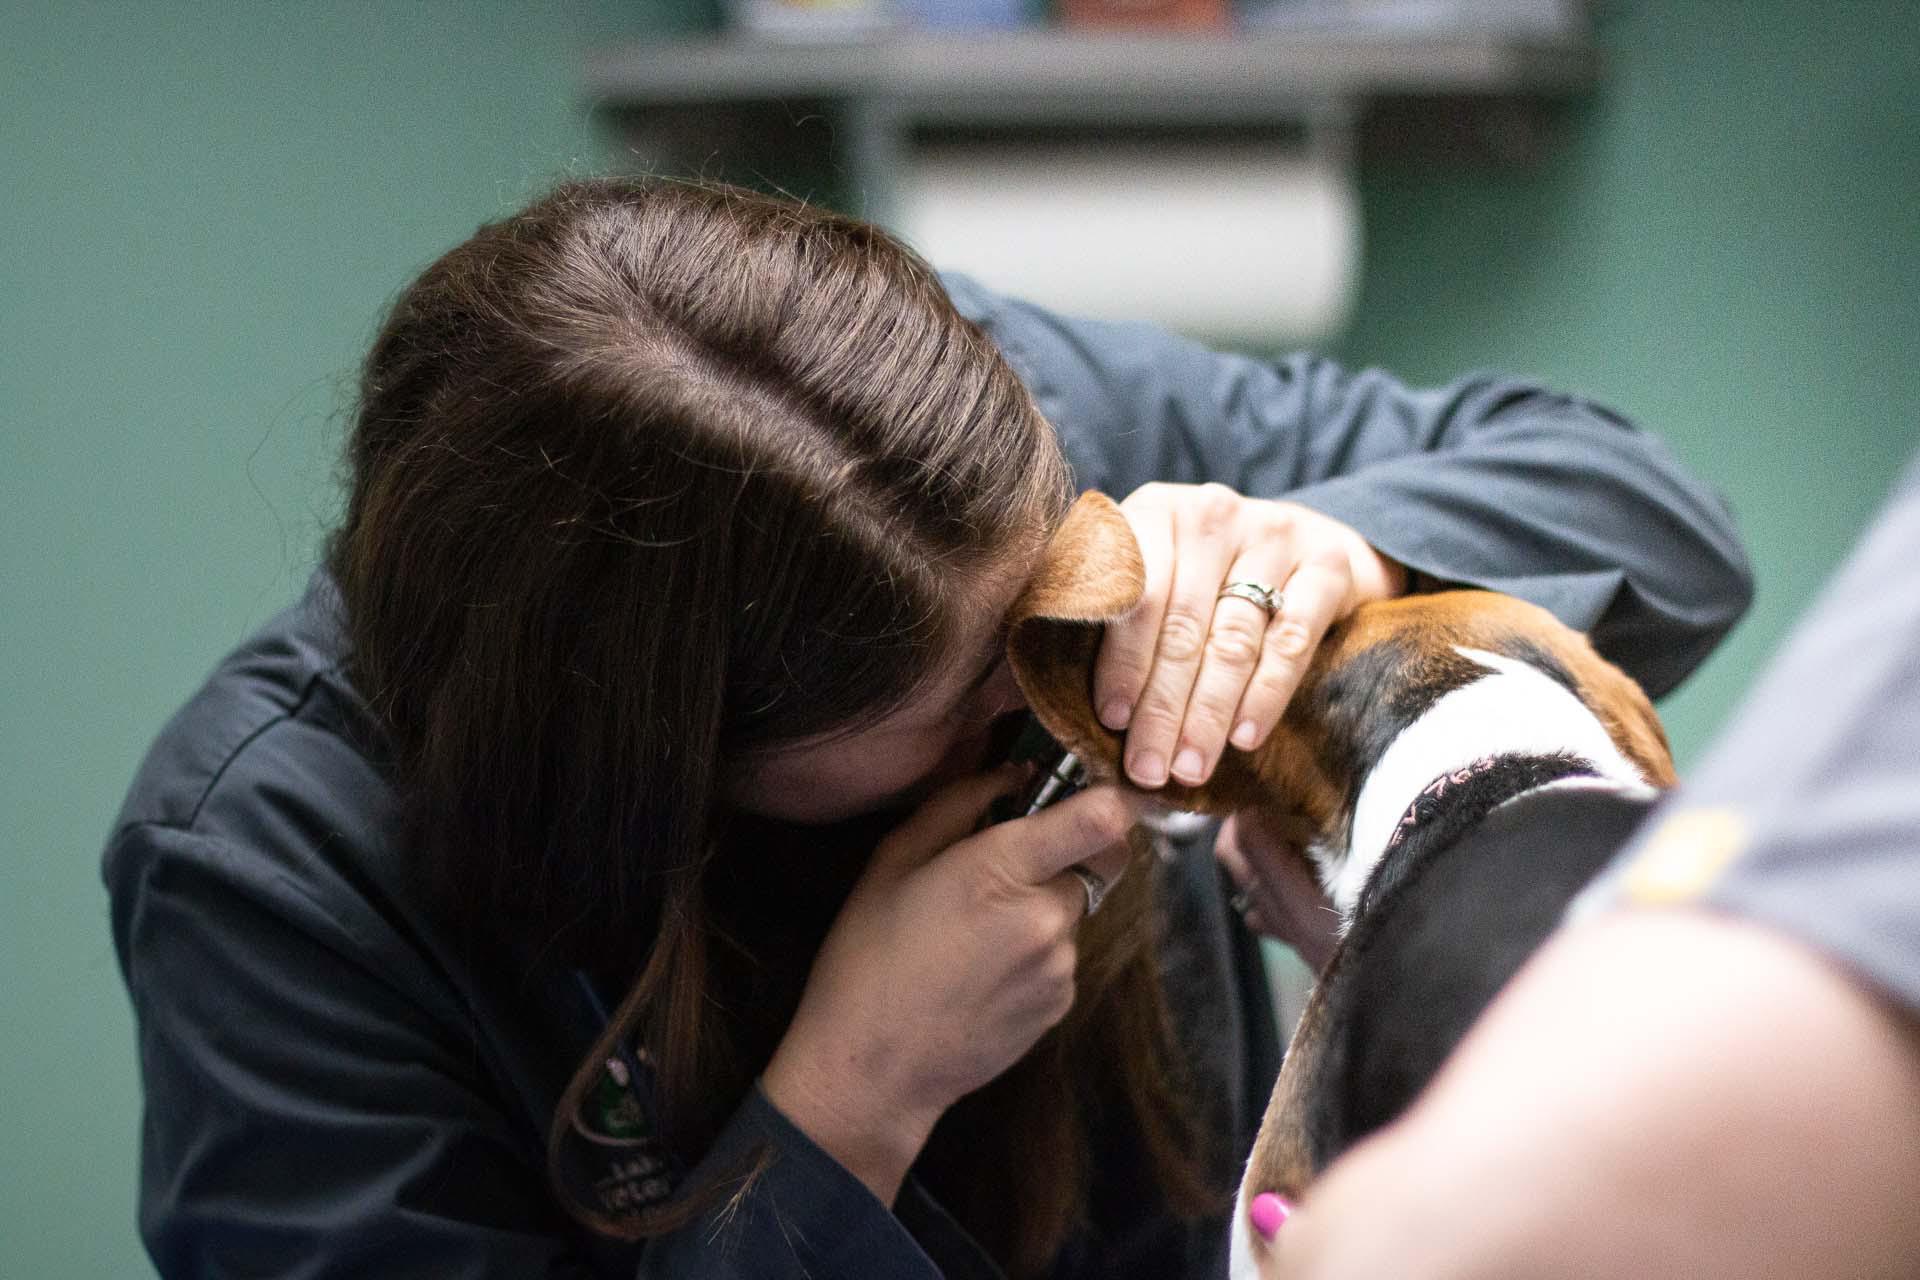 Part of our patients wellness exam is to check the ears, and this adorable pooch was a great patient Lakeland Veterinary Hospital Baxter (218)829-1709